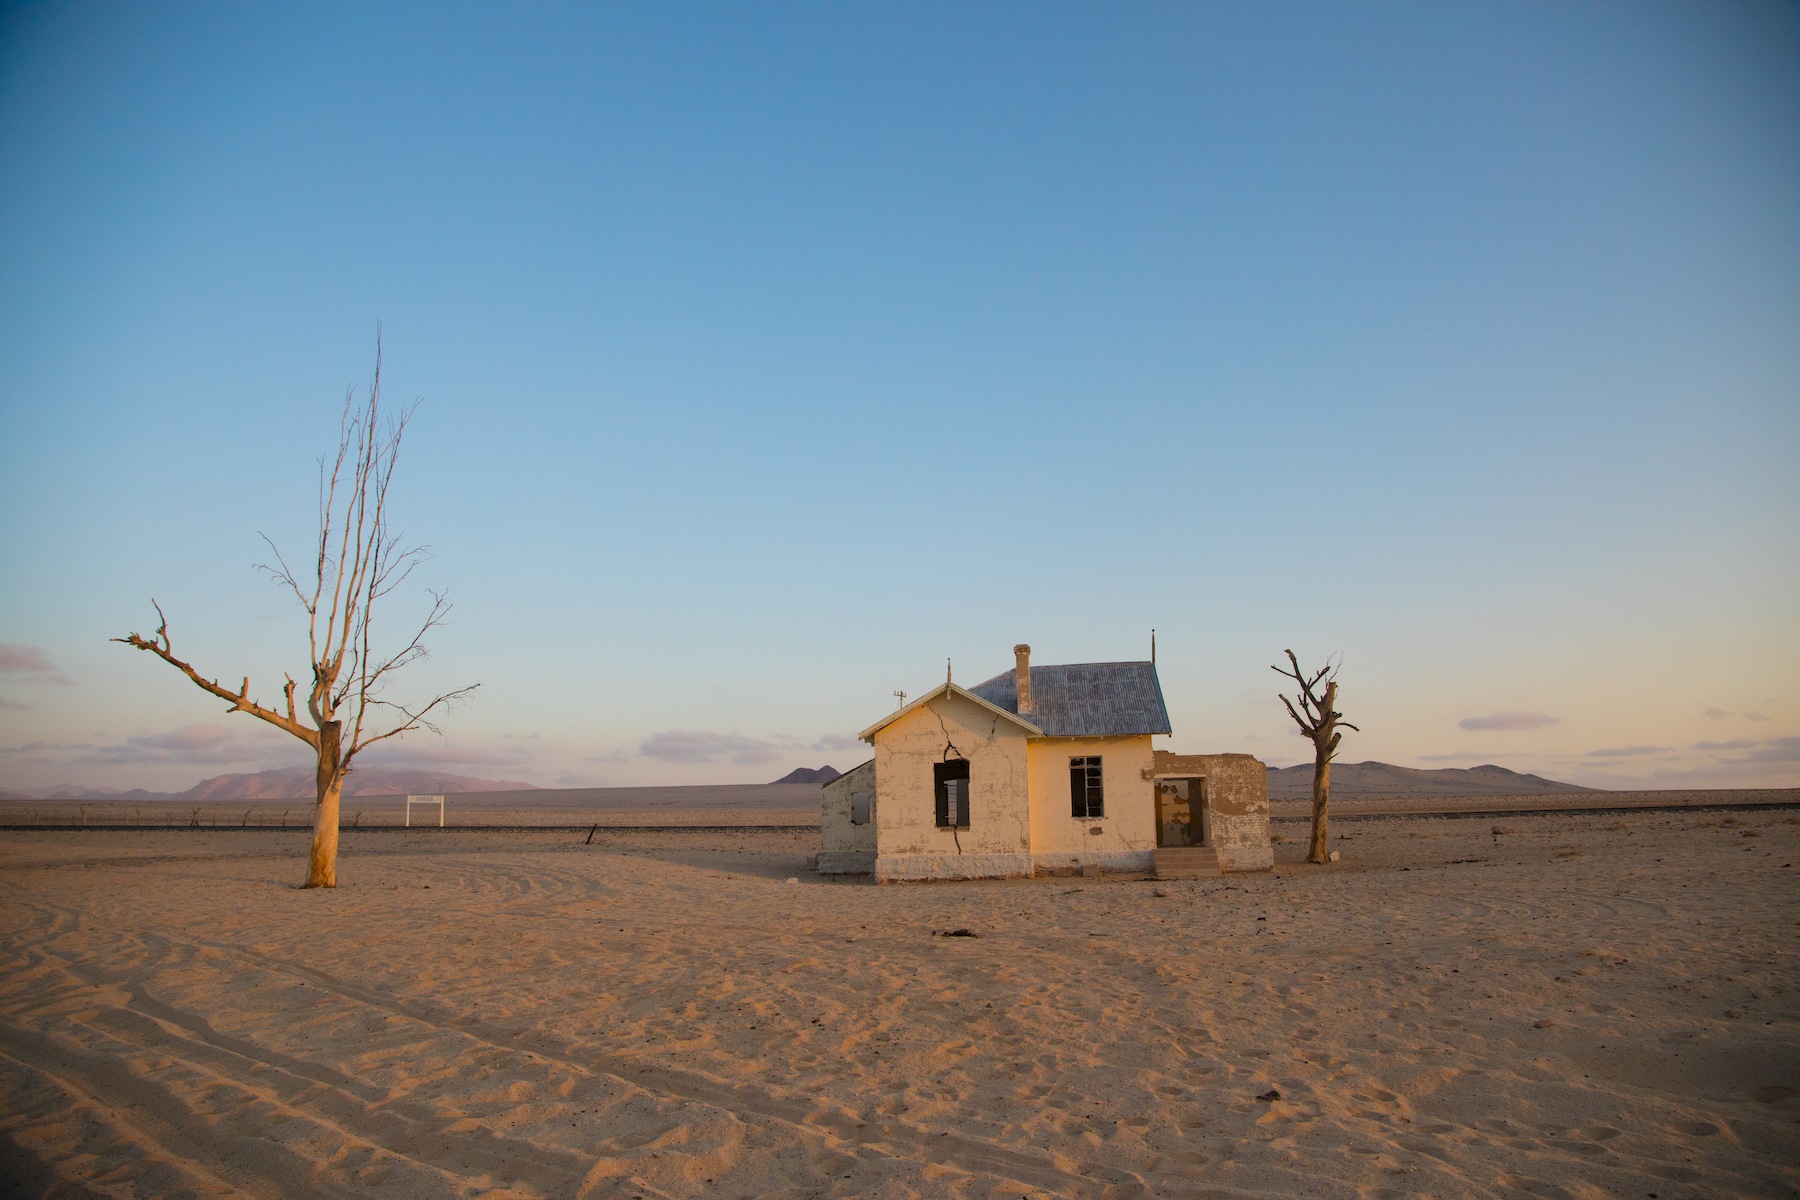 Explore Namibia's German colonial past at the abandoned Garub Train Station in southern Namibia